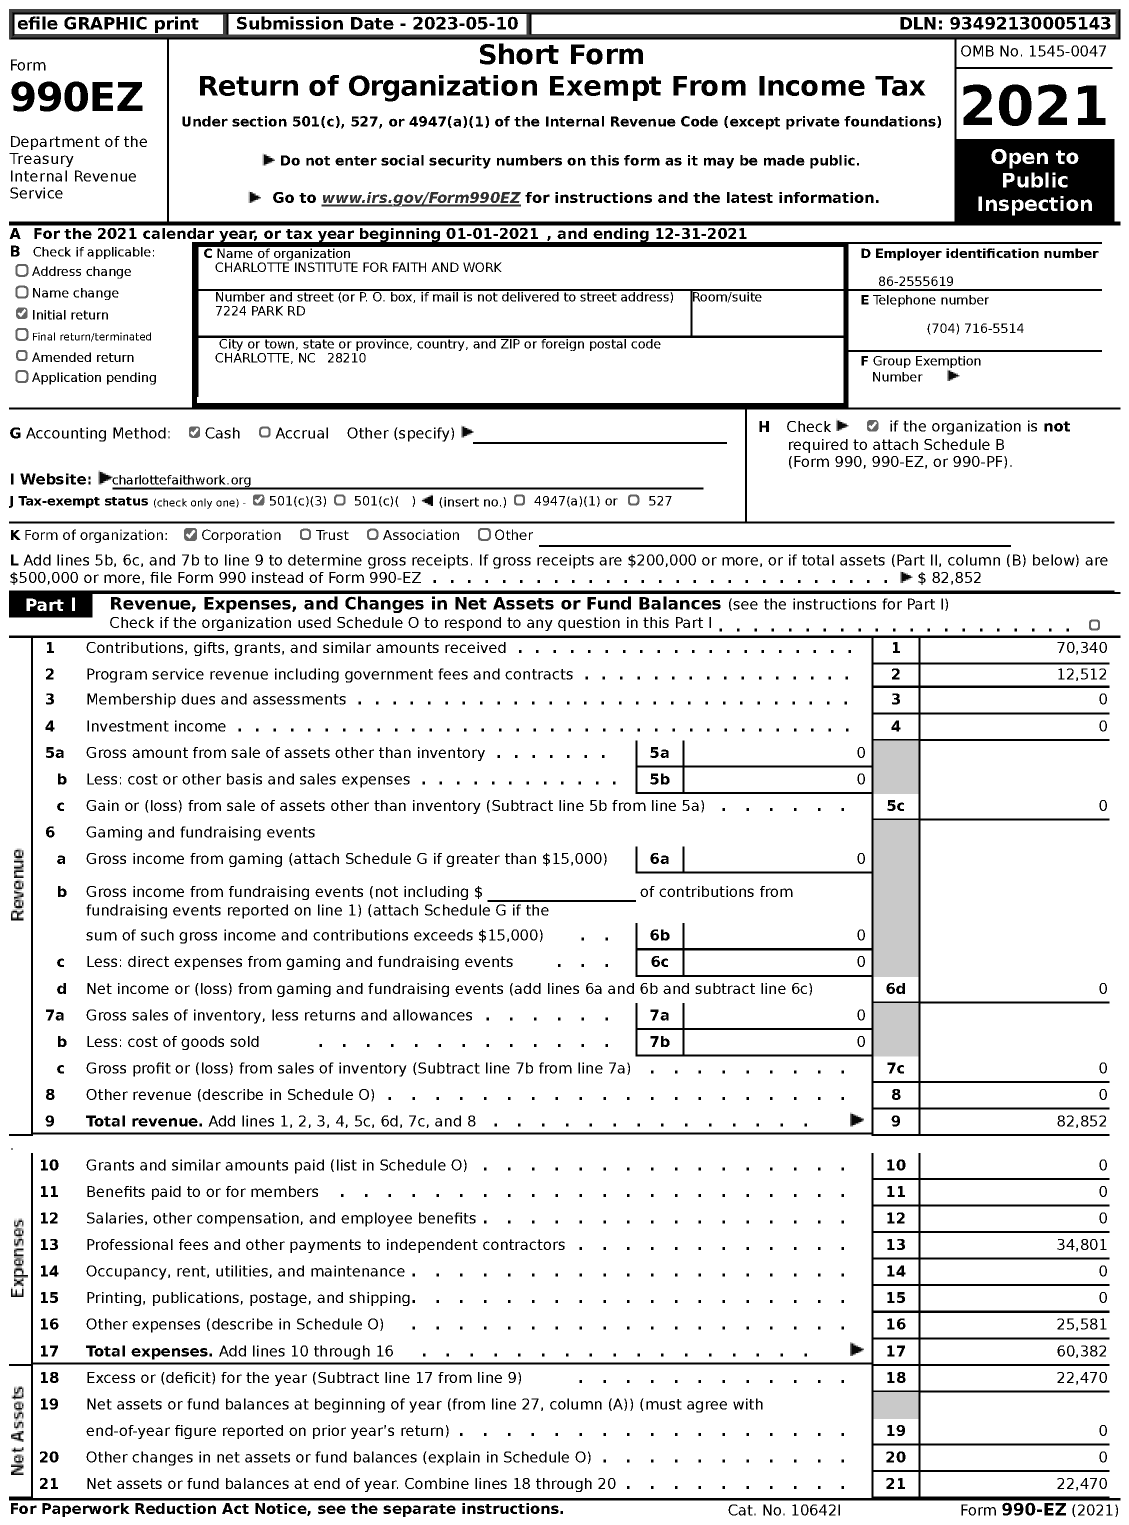 Image of first page of 2021 Form 990EZ for Charlotte Institute for Faith and Work